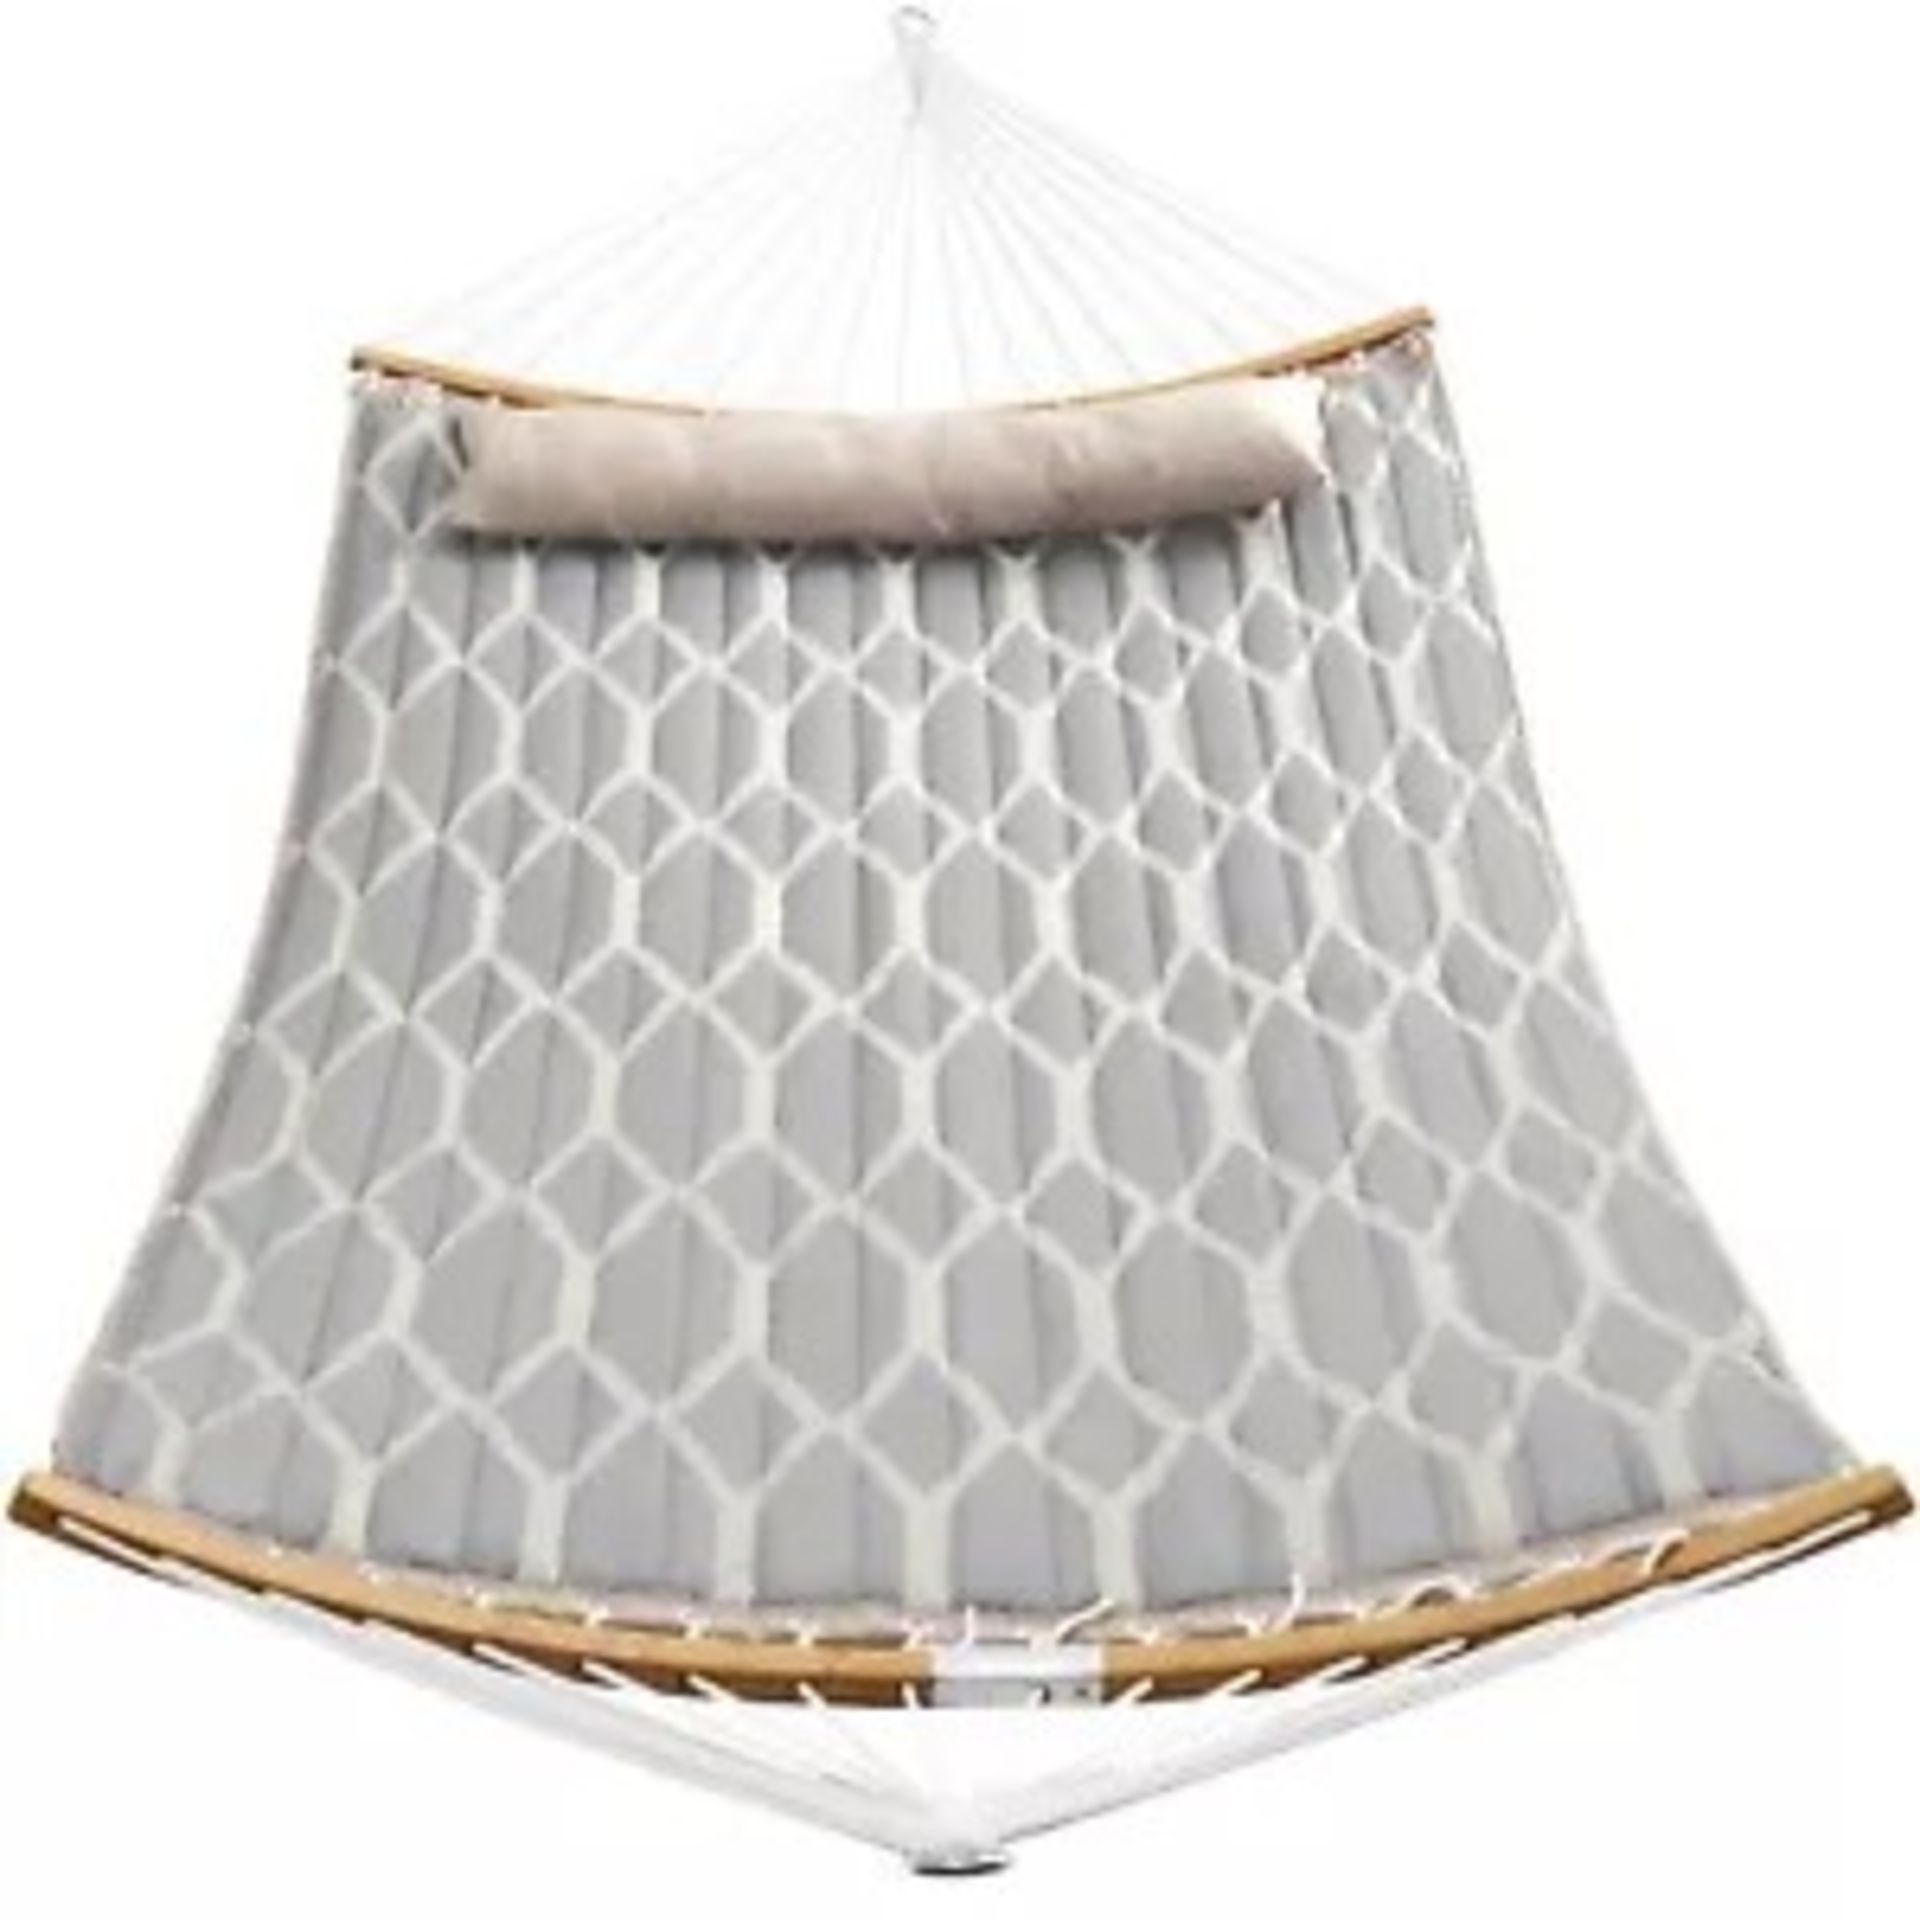 FREE DELIVERY - BRAND NEW HAMMOCK QUILTED FABRIC HAMMOCK DETACHABLE CURVED BAMBOO